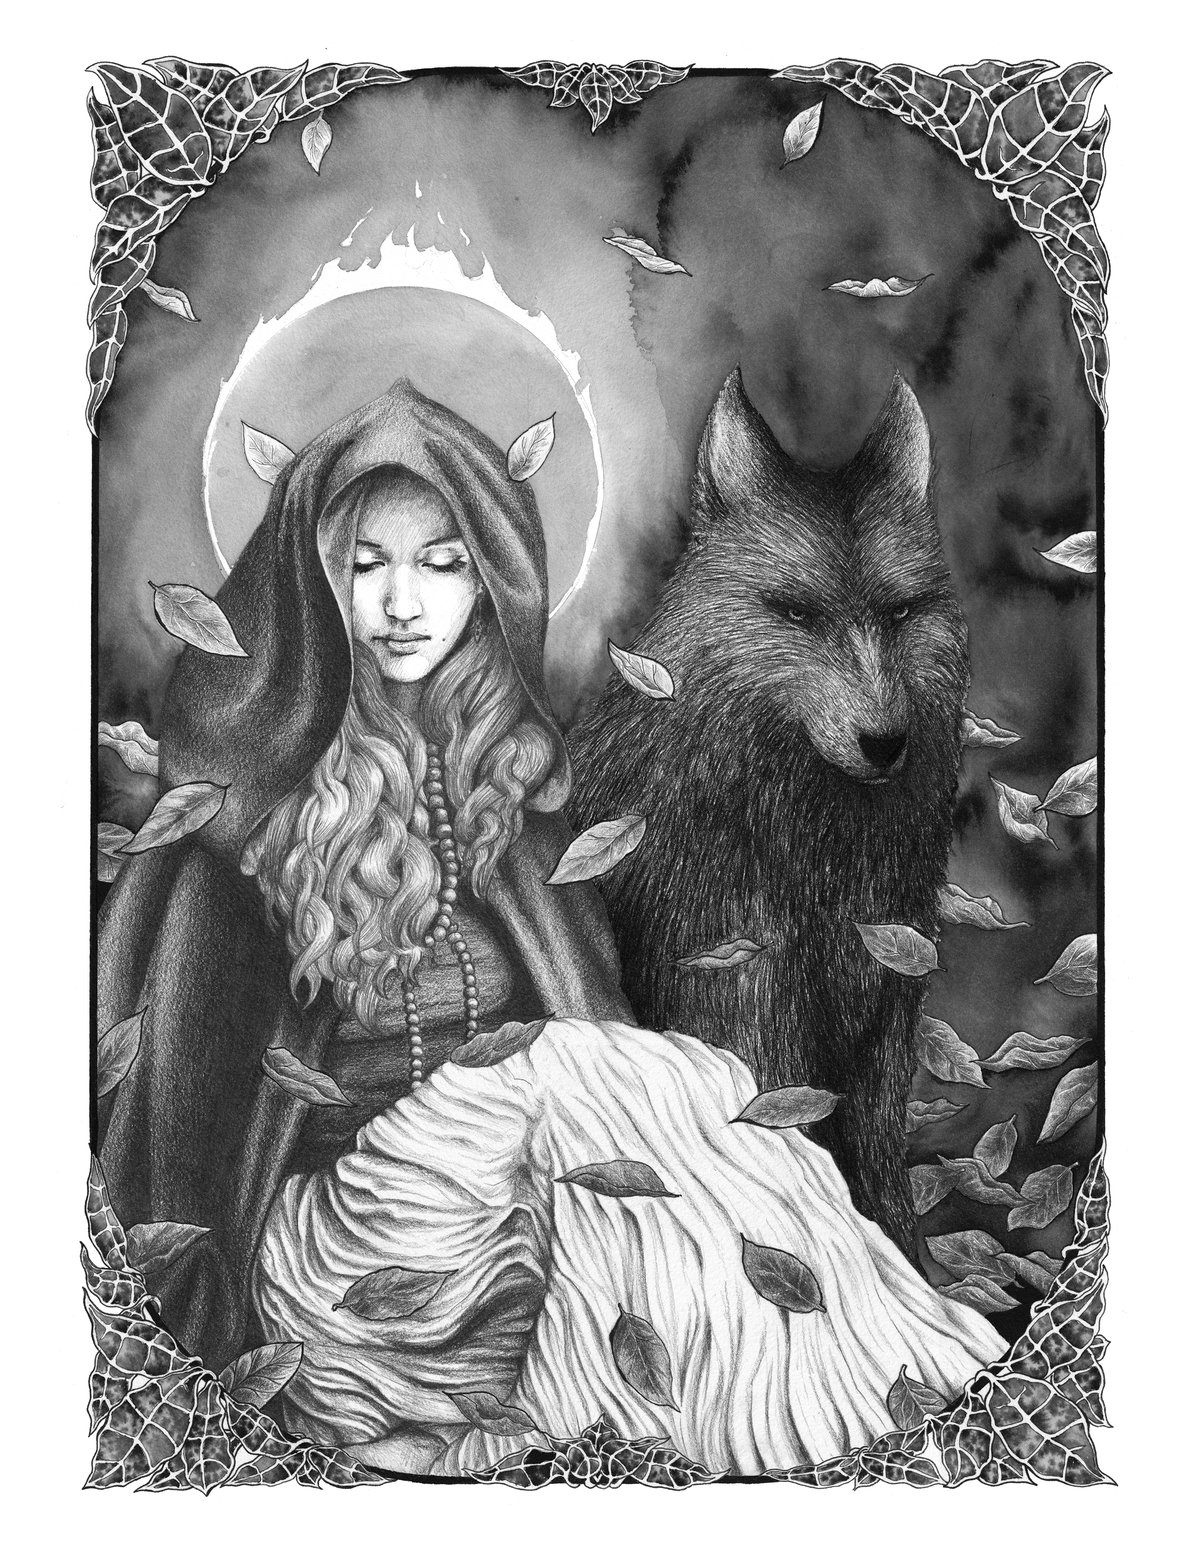 Image of The Witch and the Wolf in a Ravenwood Frame